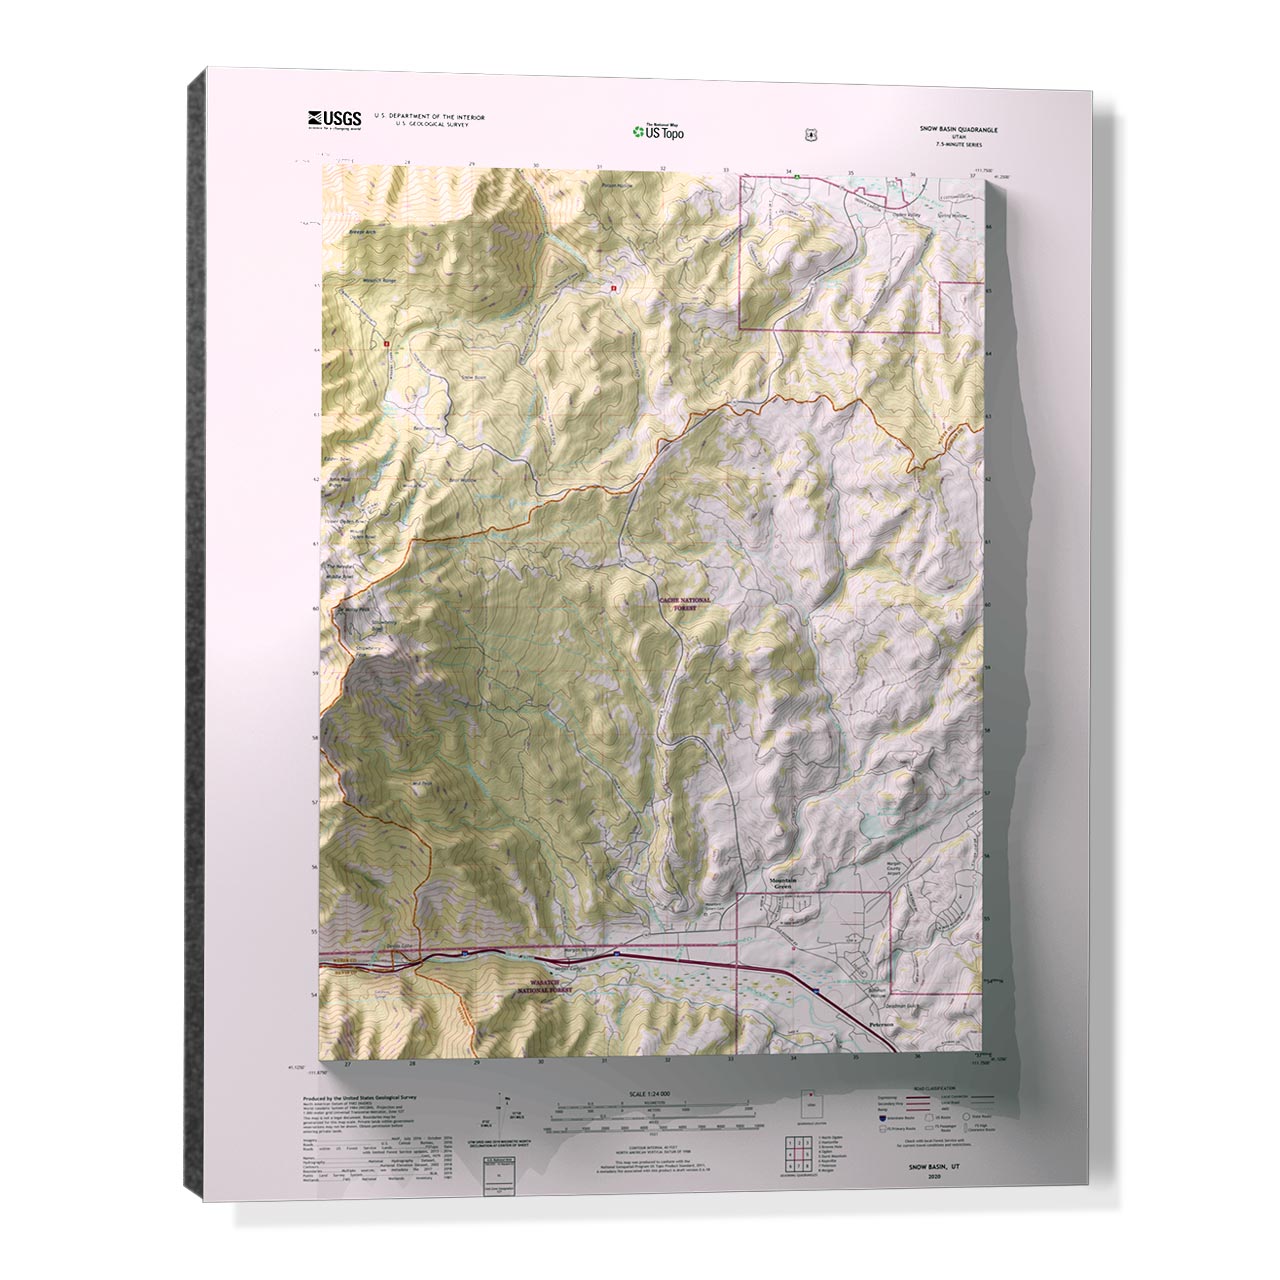 Delaware 3d Usgs Raised Relief Topography Maps 2657